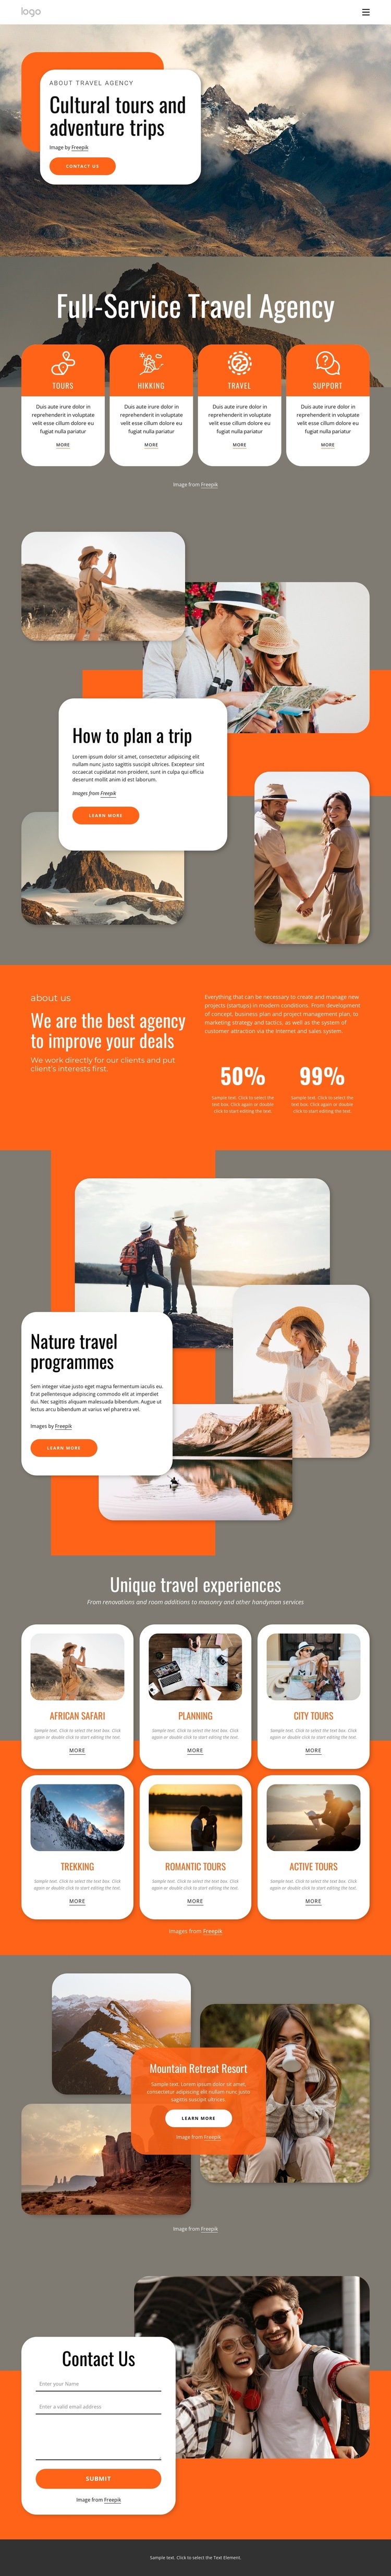 Group travel for all ages Wix Template Alternative